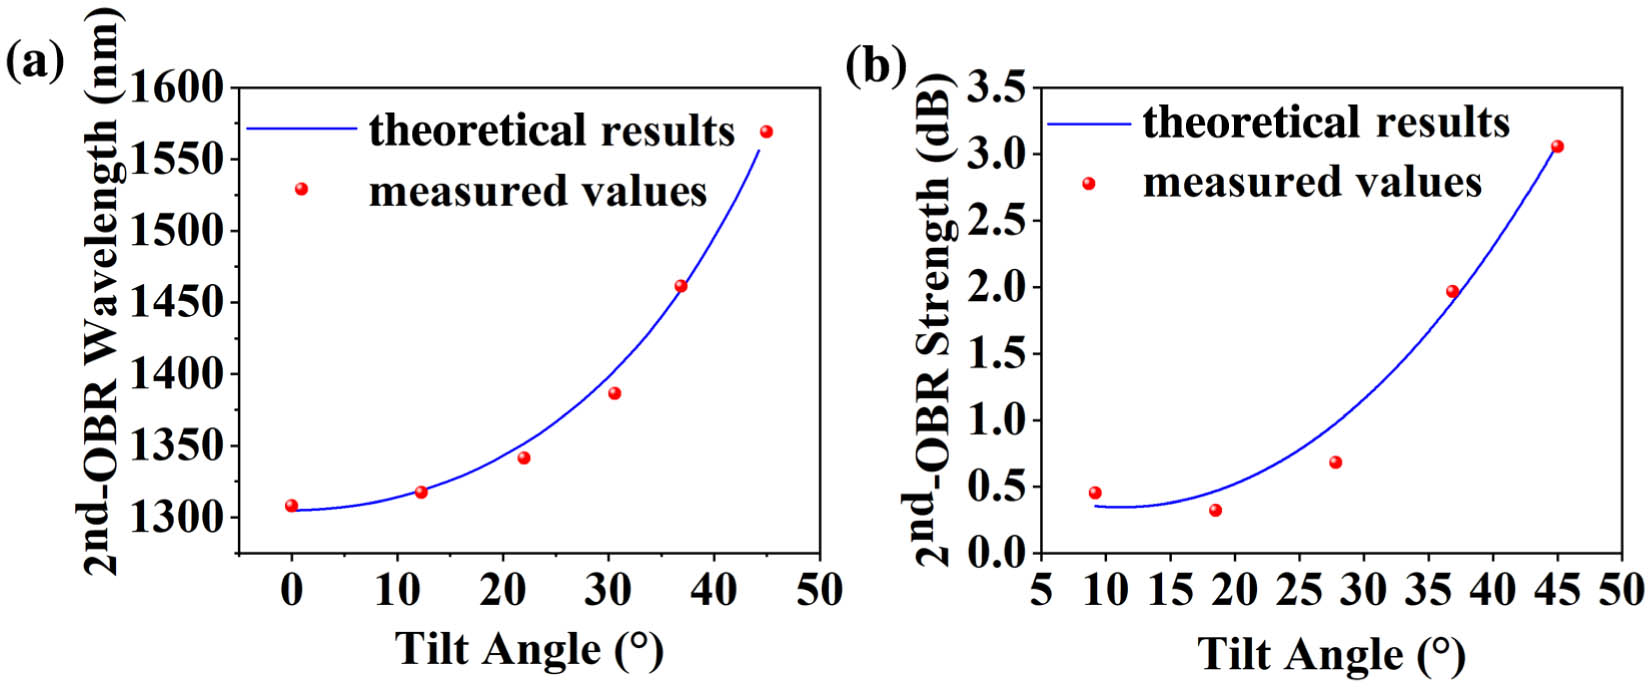 (a) Experimental and theoretical relationship between the 2nd-OBR wavelength and the grating tilt angle; (b) 2nd-OBR strength against the tilt angle.